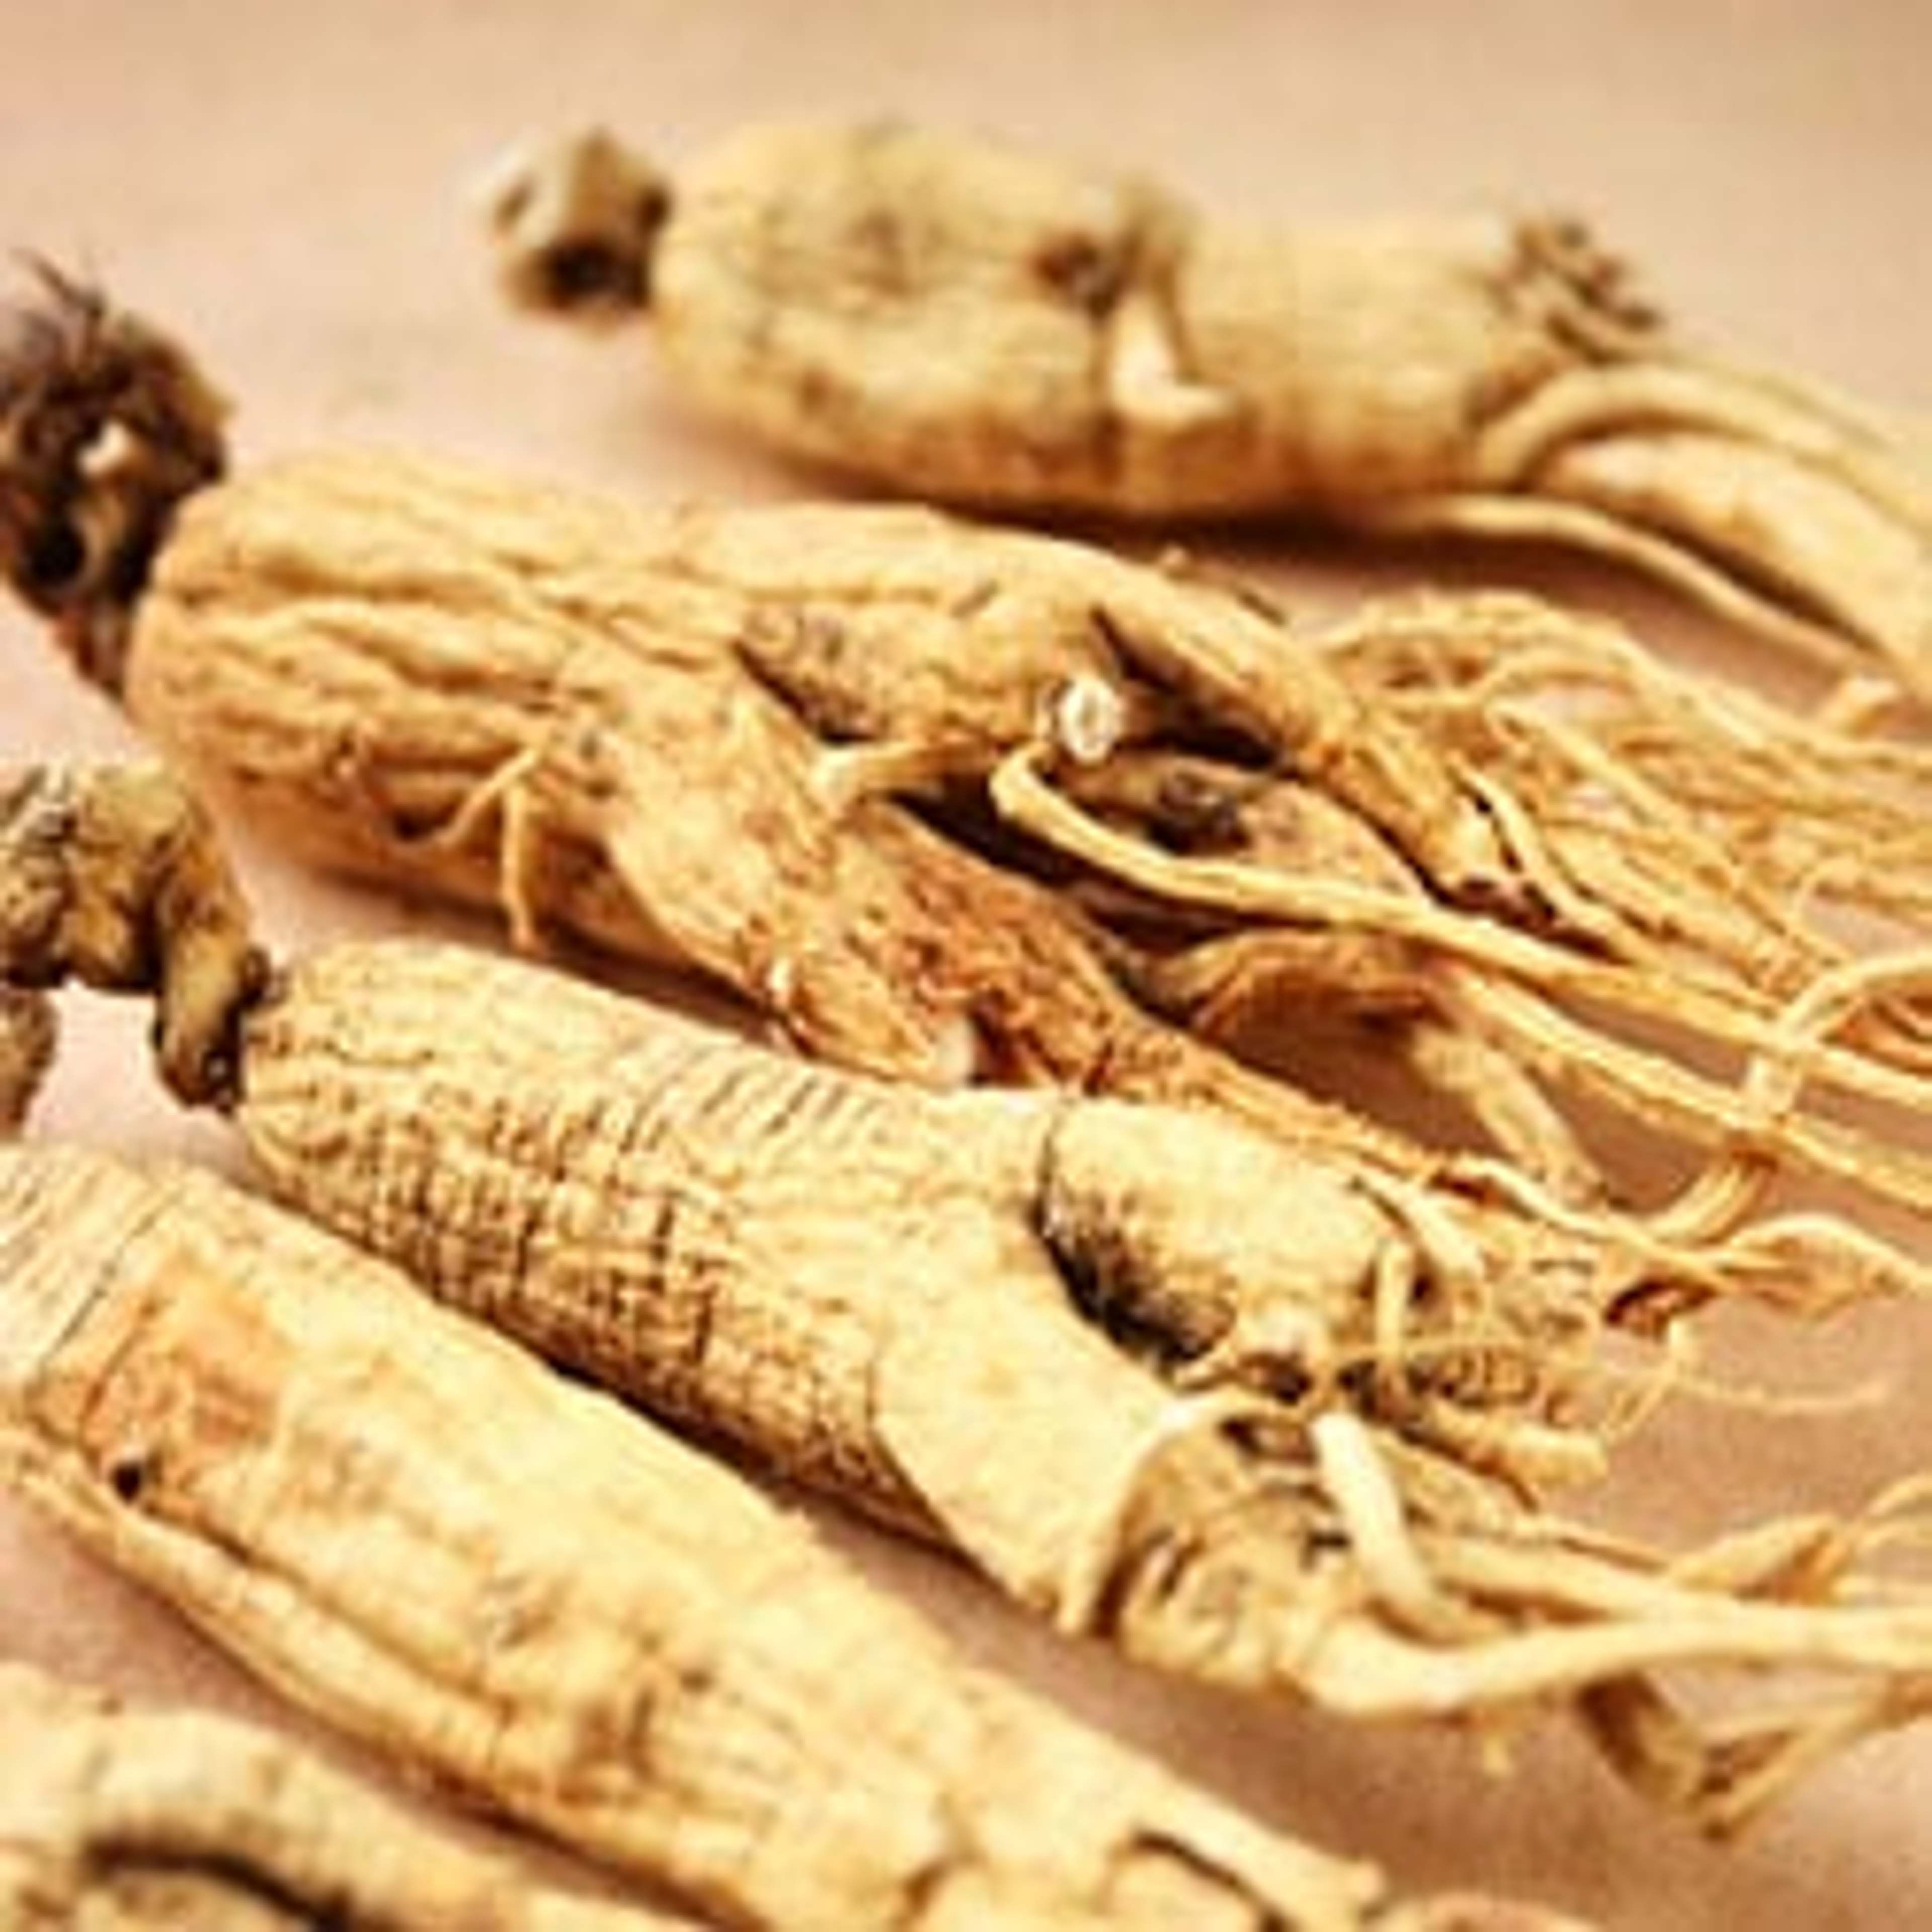 Ginseng is a natural and powerful supplement which can enhance the body's function to maintain a healthy weight, assist memory loss and boost the immune system.